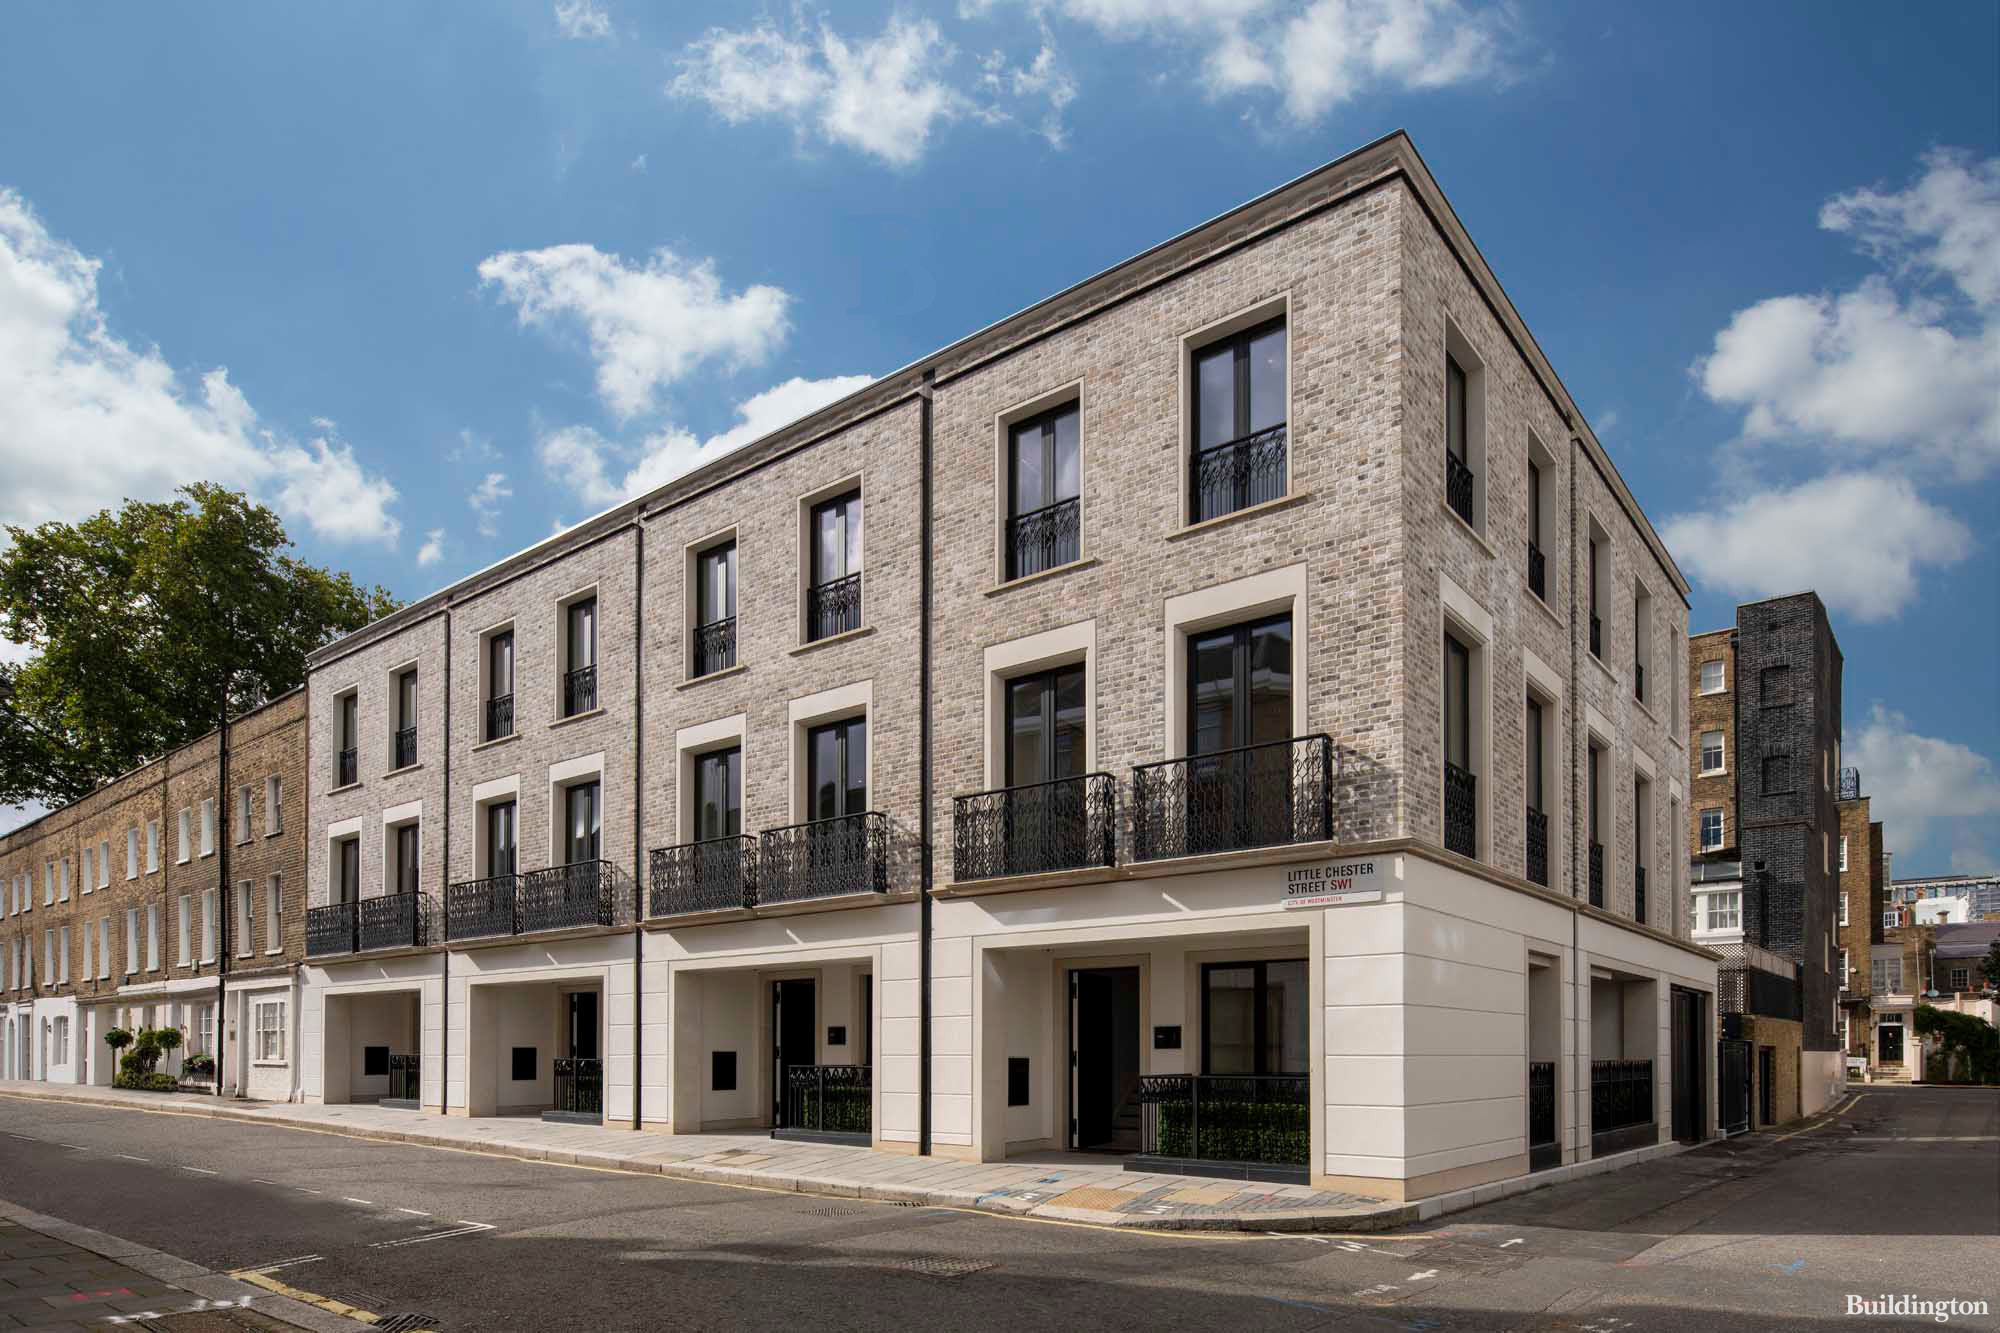 Chester Collection townhouses at 1-3 Little Chester Street in Belgravia, London SW1. 